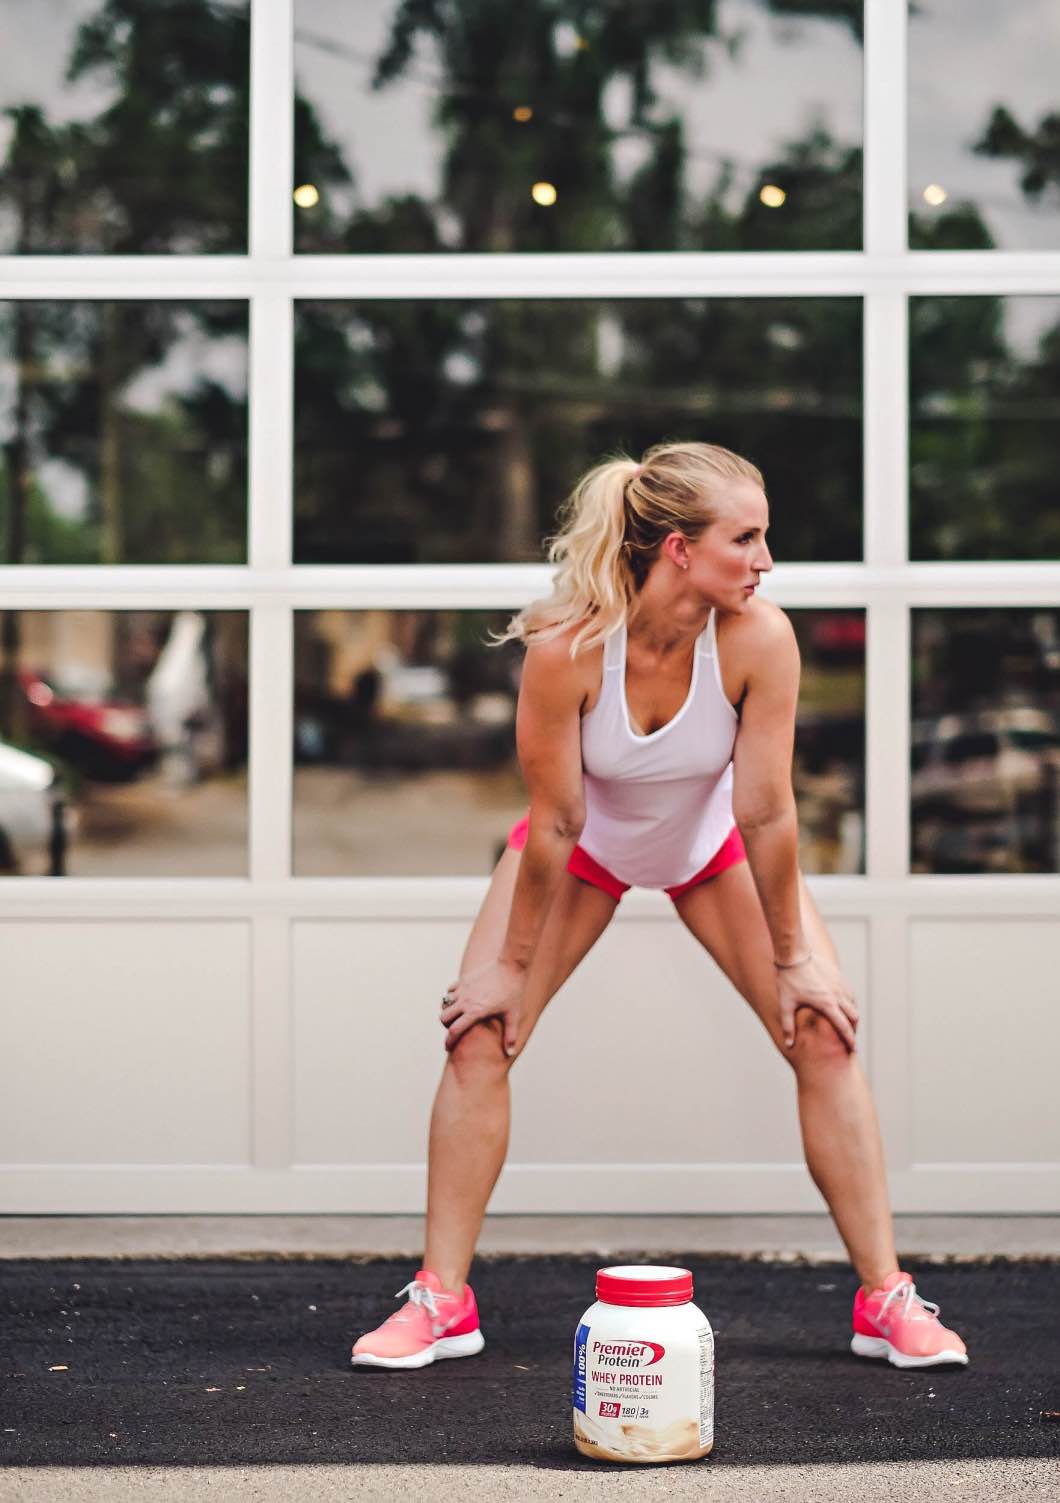 Leg Workouts At Home with Premier Protein by fitness blogger Jessica of Happily Hughes